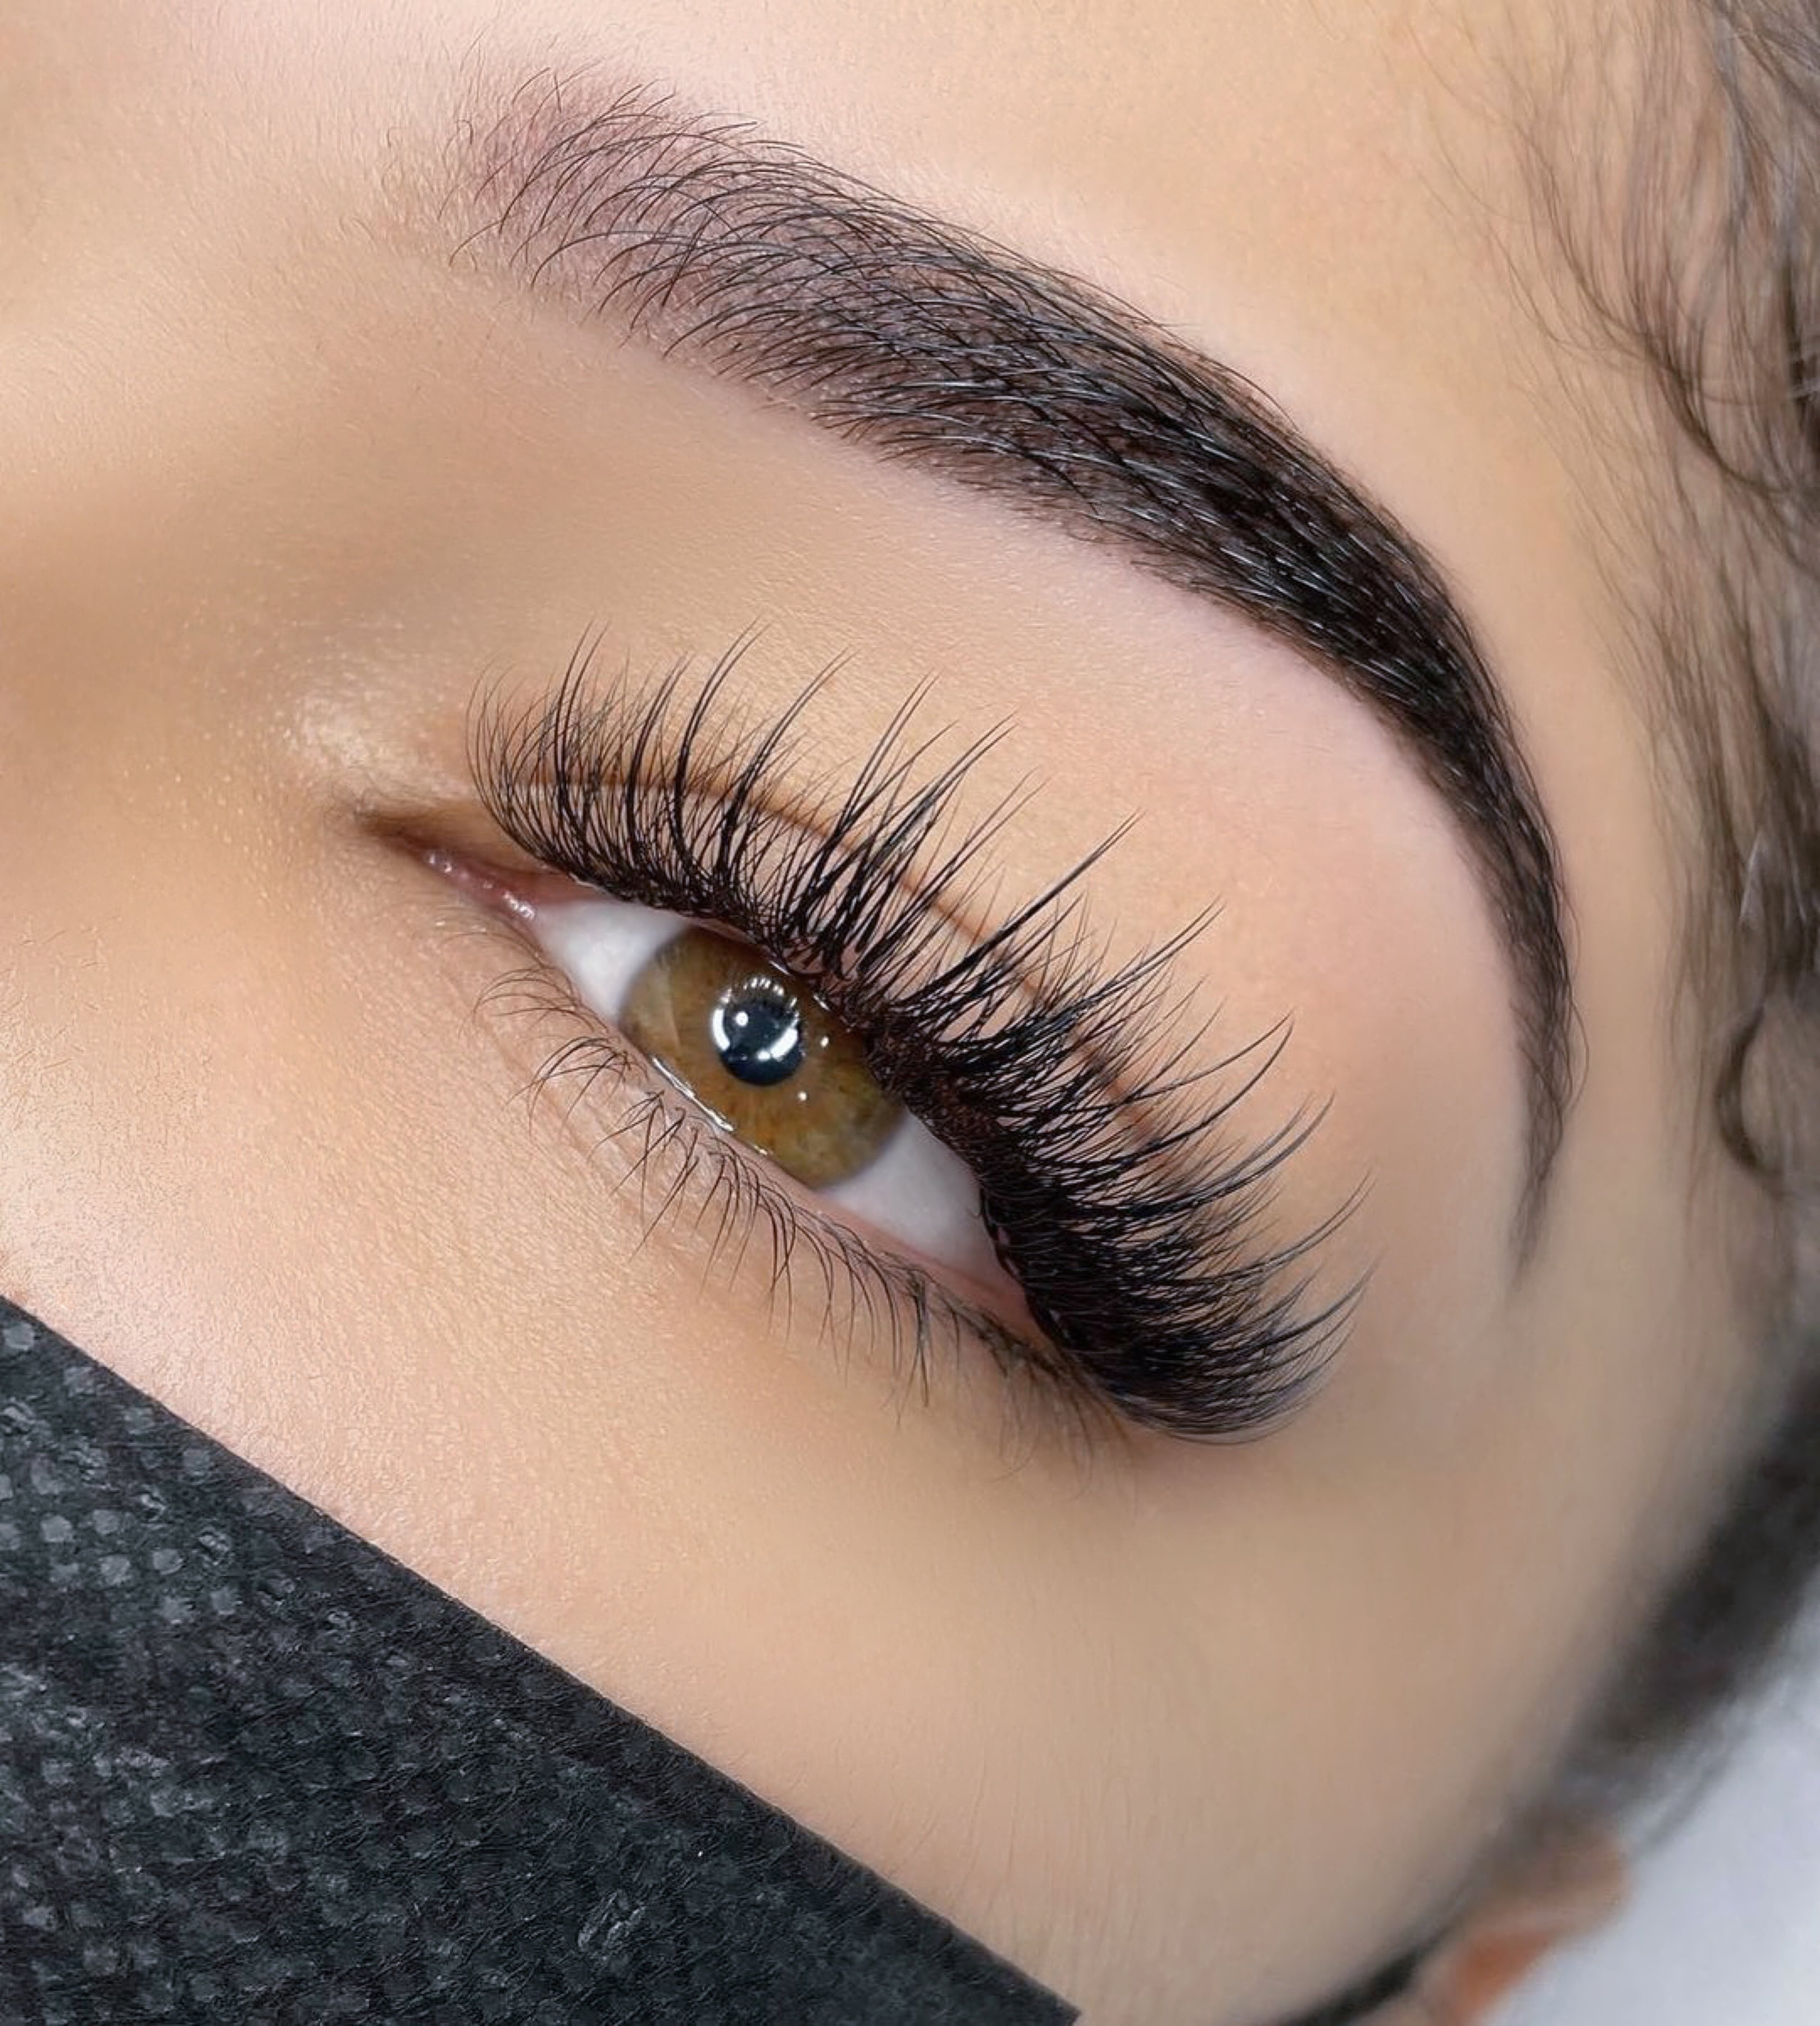 Lash Extension Lighting: What to Look For - The Lash Professional